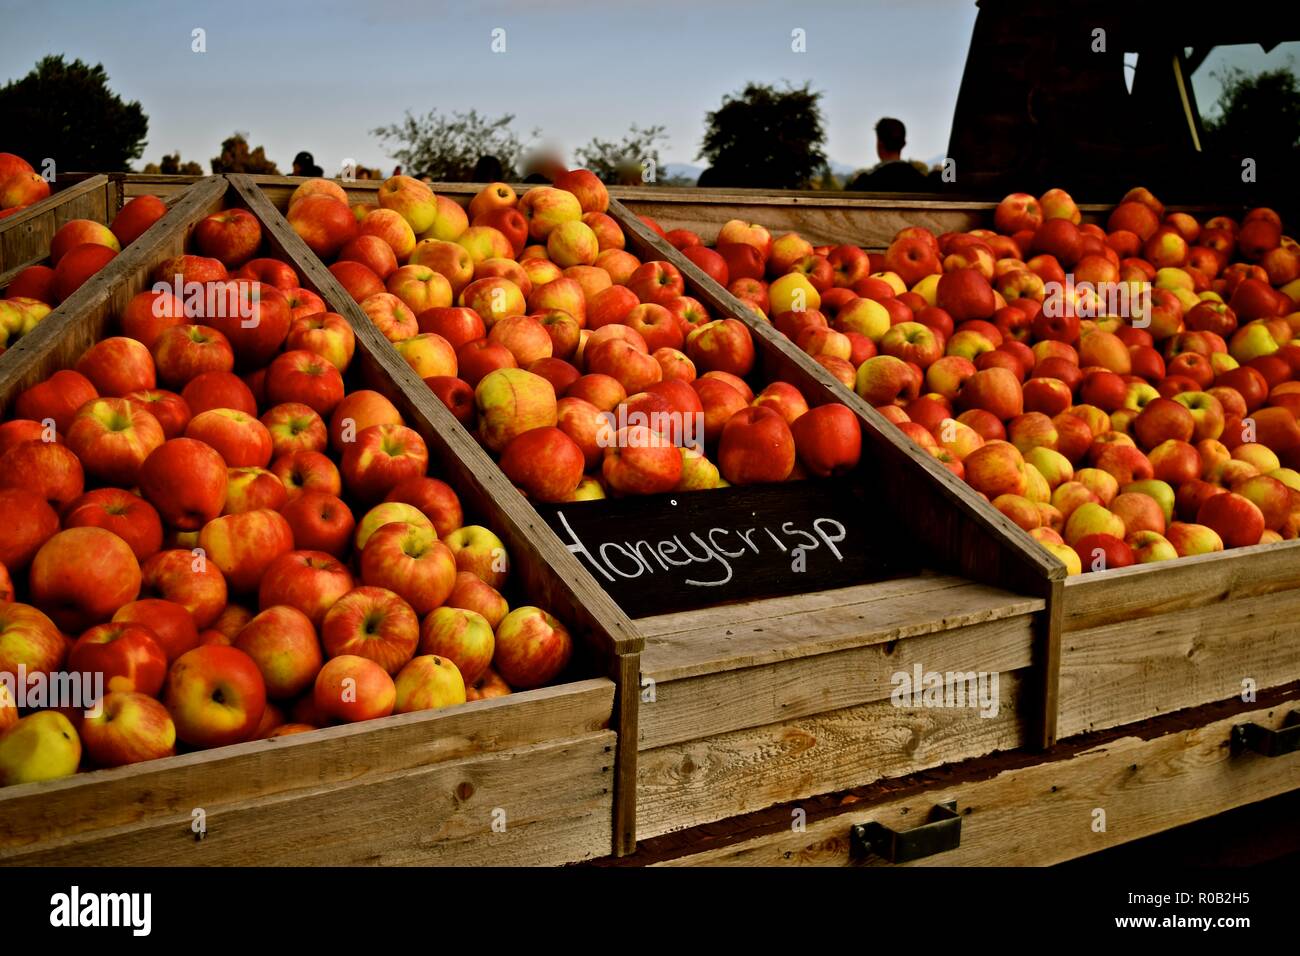 https://c8.alamy.com/comp/R0B2H5/autumn-season-is-harvest-time-for-apples-in-washington-state-farms-in-snohomish-celebrate-by-opening-up-their-farms-to-the-public-R0B2H5.jpg